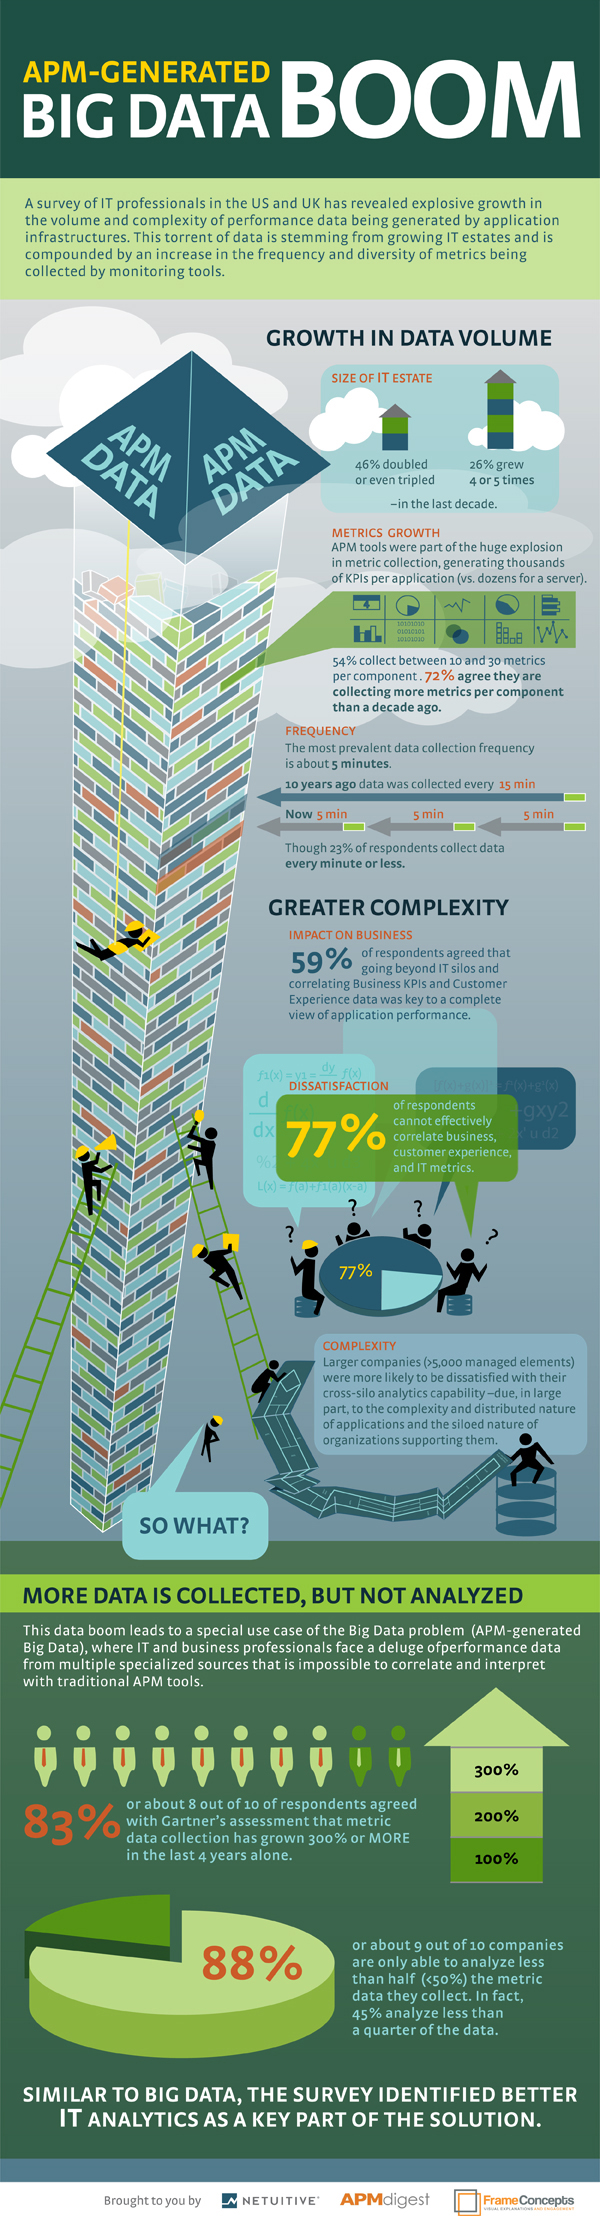 Big Data in Higher Education Infographic